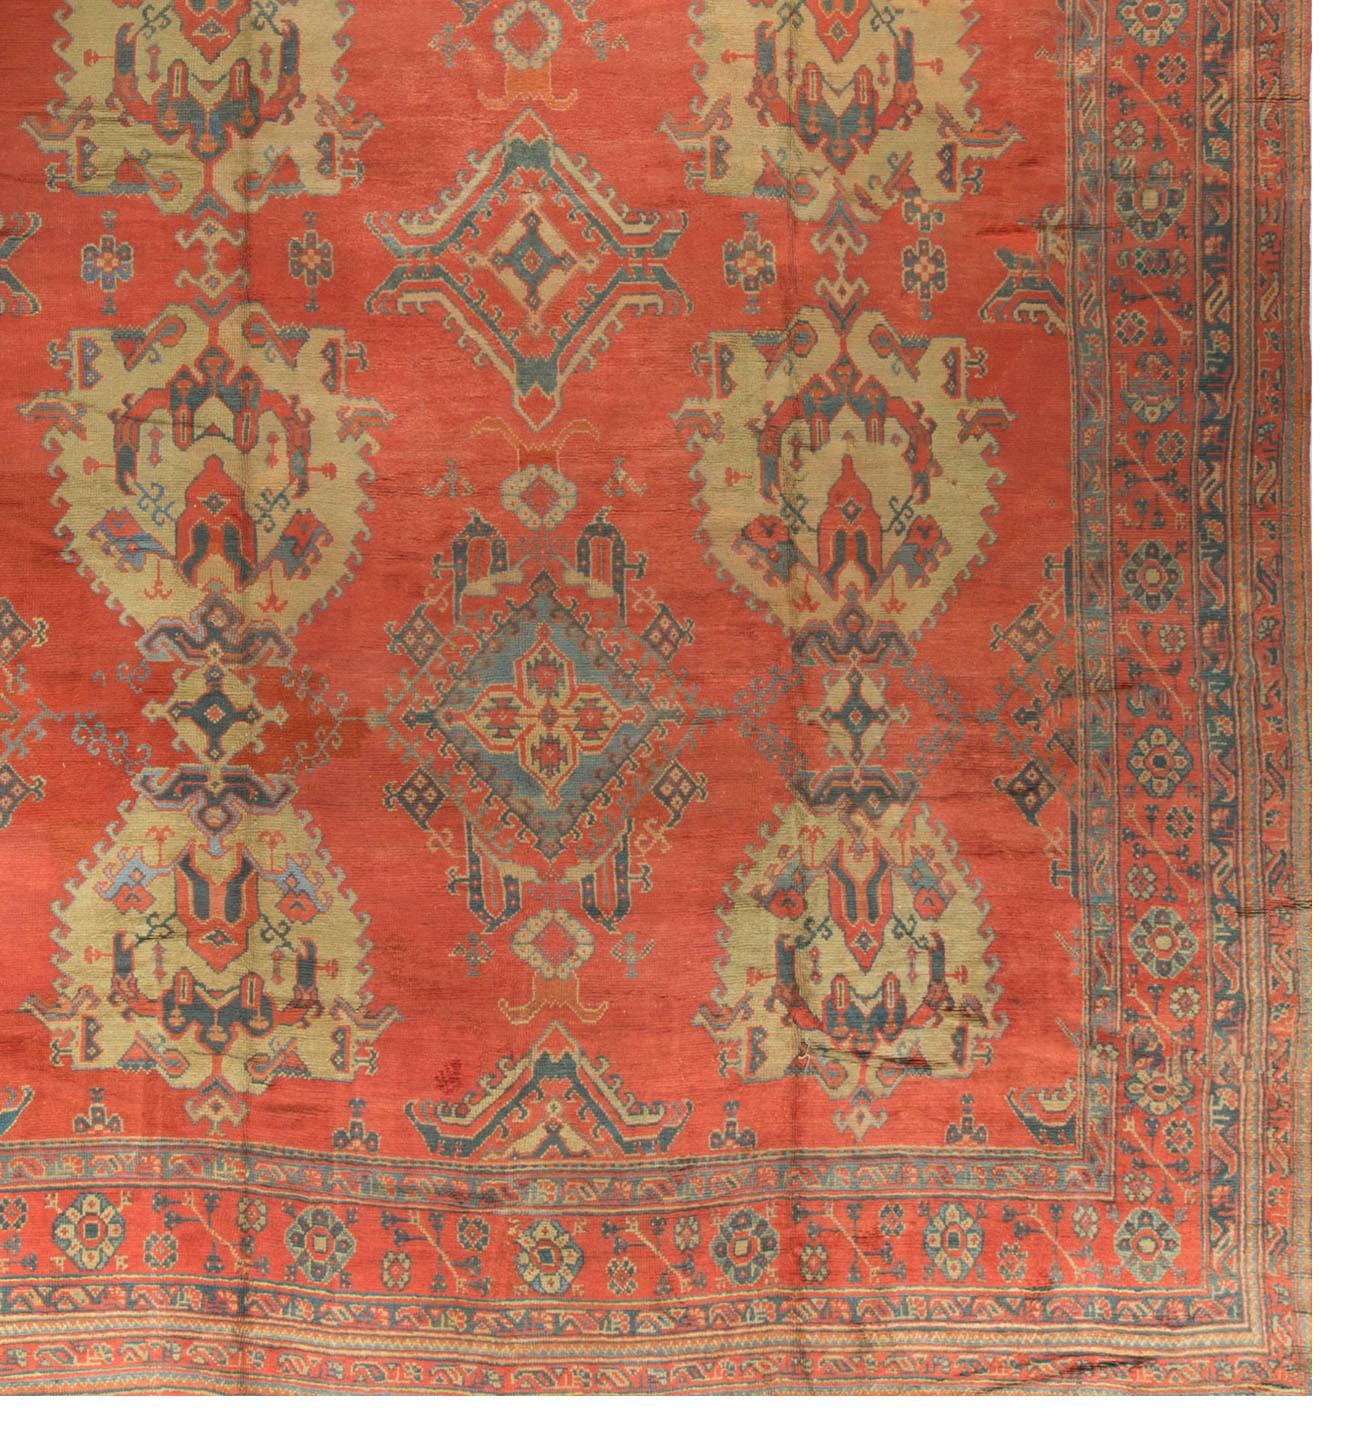 Antique Turkish Oushak Handwoven Luxury Wool Red Rug,  14'4 x 20' Size For Sale 2